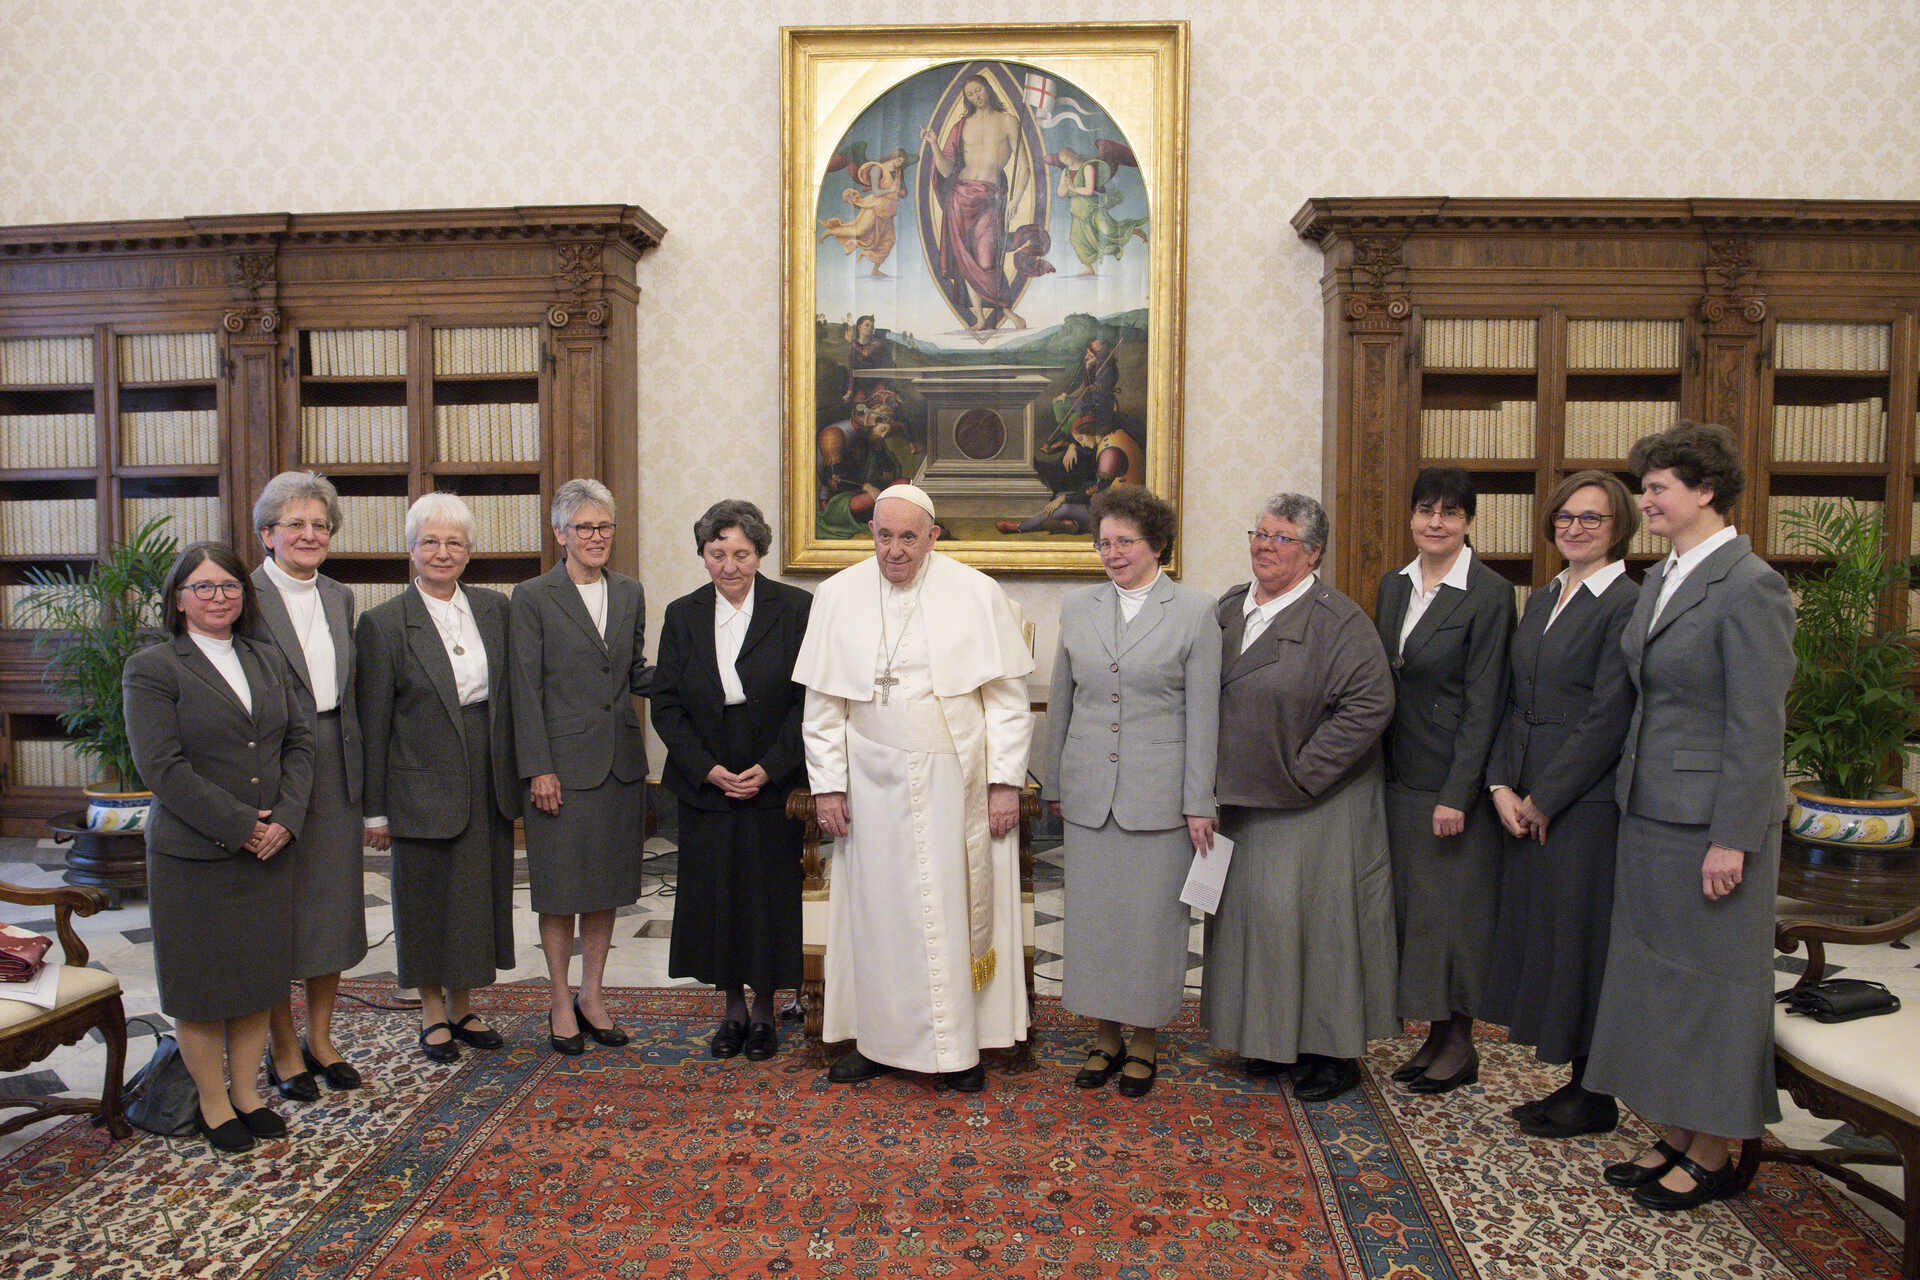 Sr. Maribeth Larkin Joins SSS Federation Leadership in Audience with Pope Francis, Launching 100th Anniversary of Our Founding